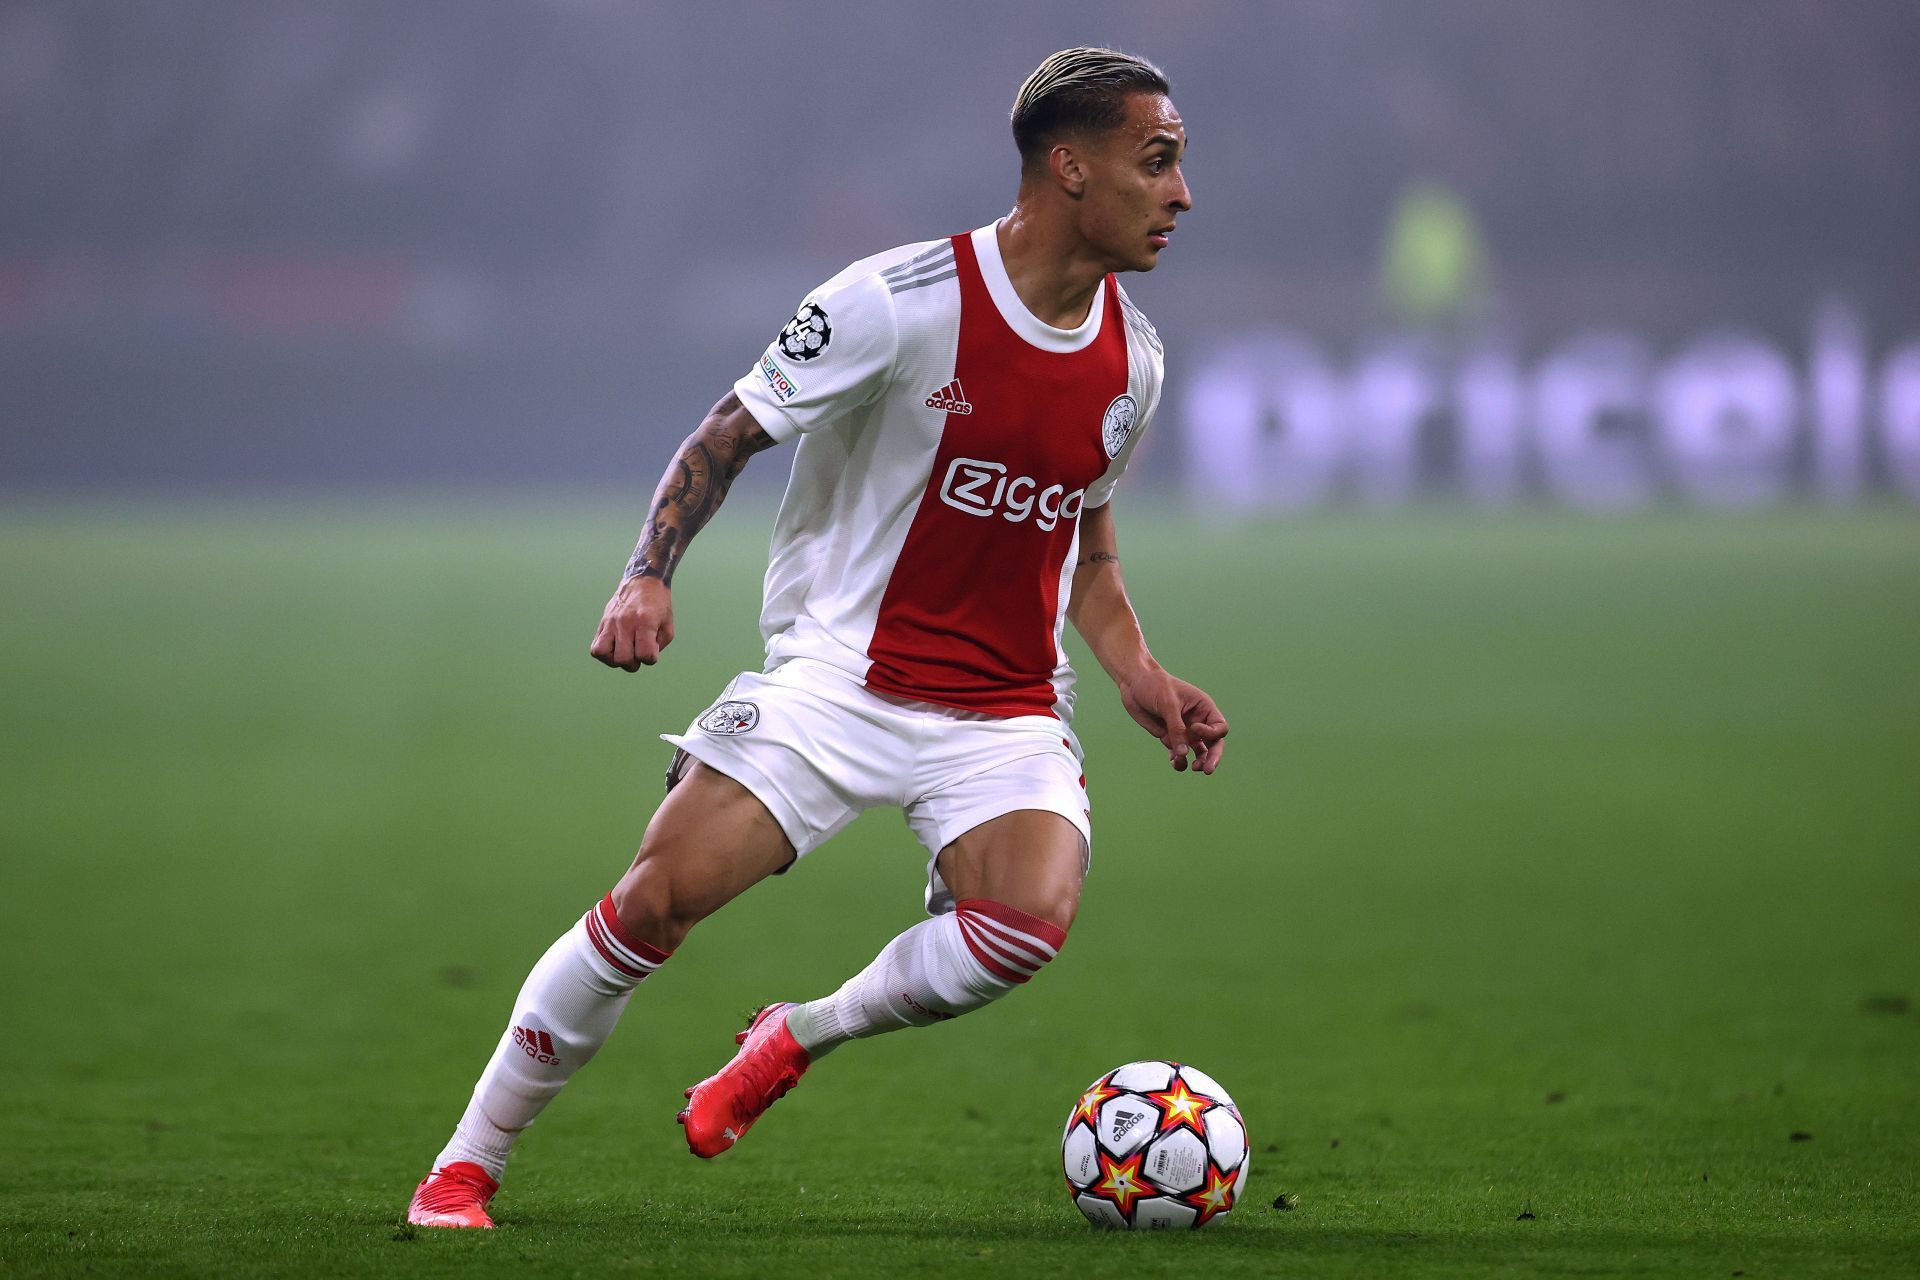 The Brazilian has made up his mind to leave Ajax this summer and looks set to join Manchester United.